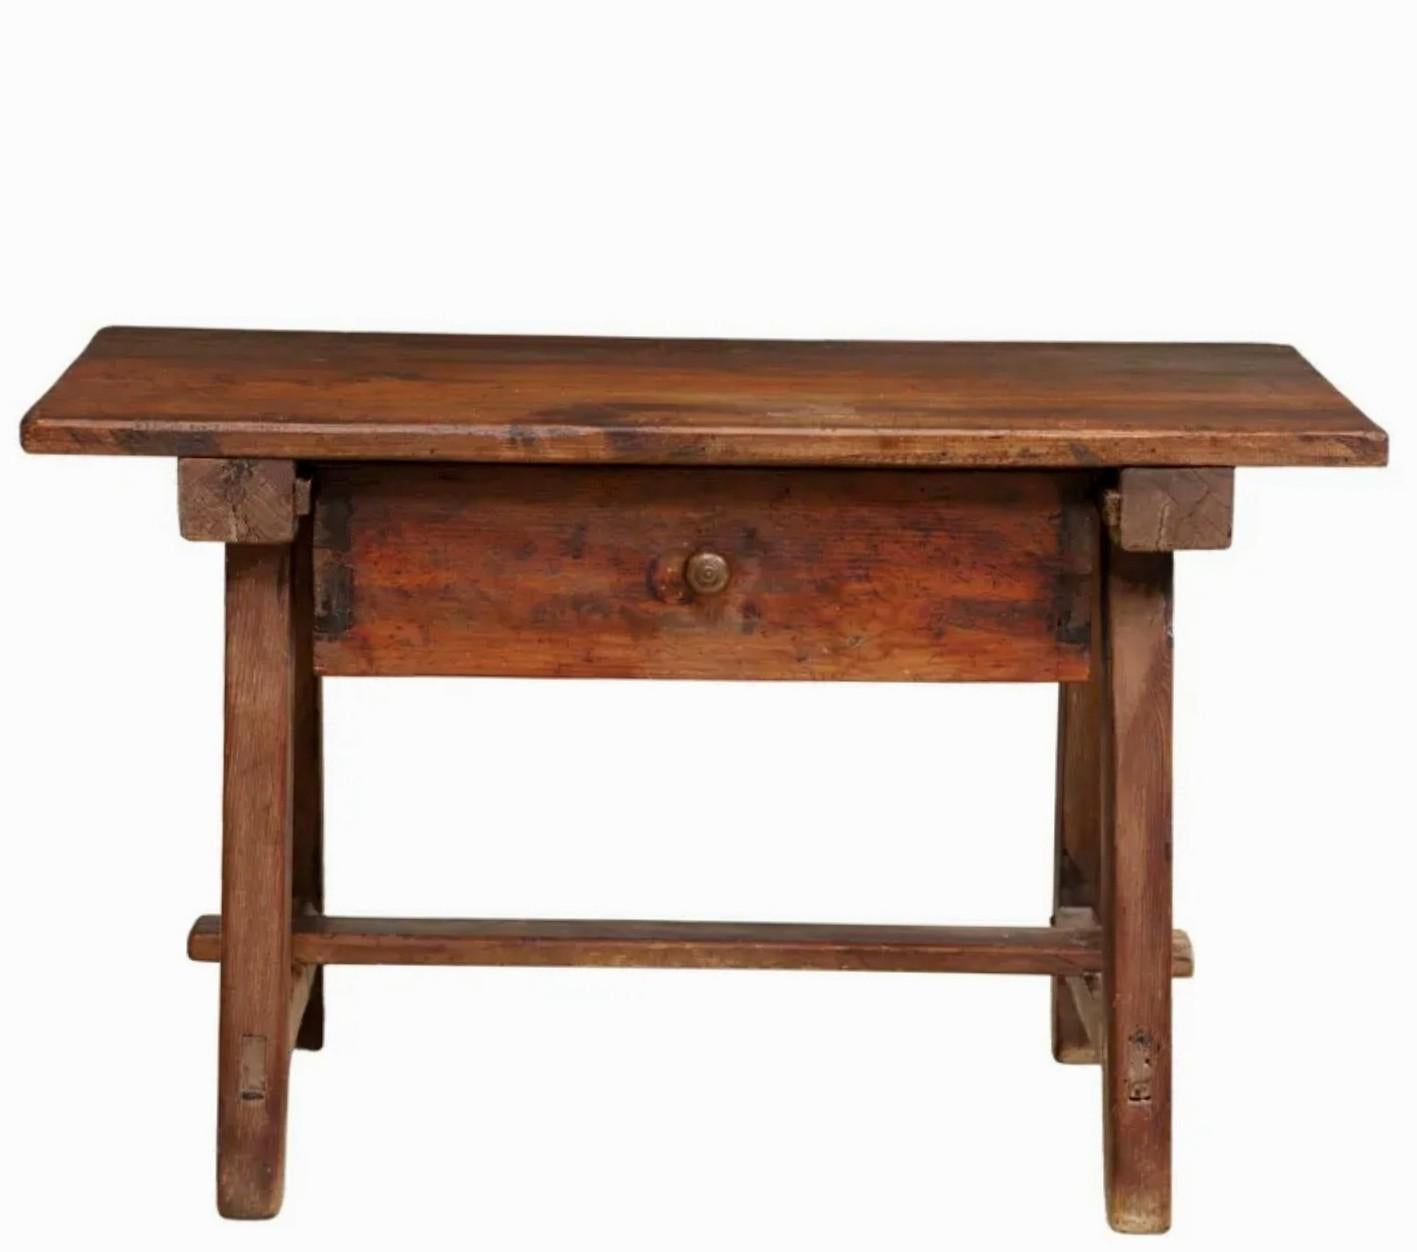 A rustic 200+ year old antique Spanish Colonial Baroque style work table with nicely aged patina.

Born in the late 18th / early 19th century, primitive hand-crafted mortised construction, having a rectangular plank top, single frieze drawer with